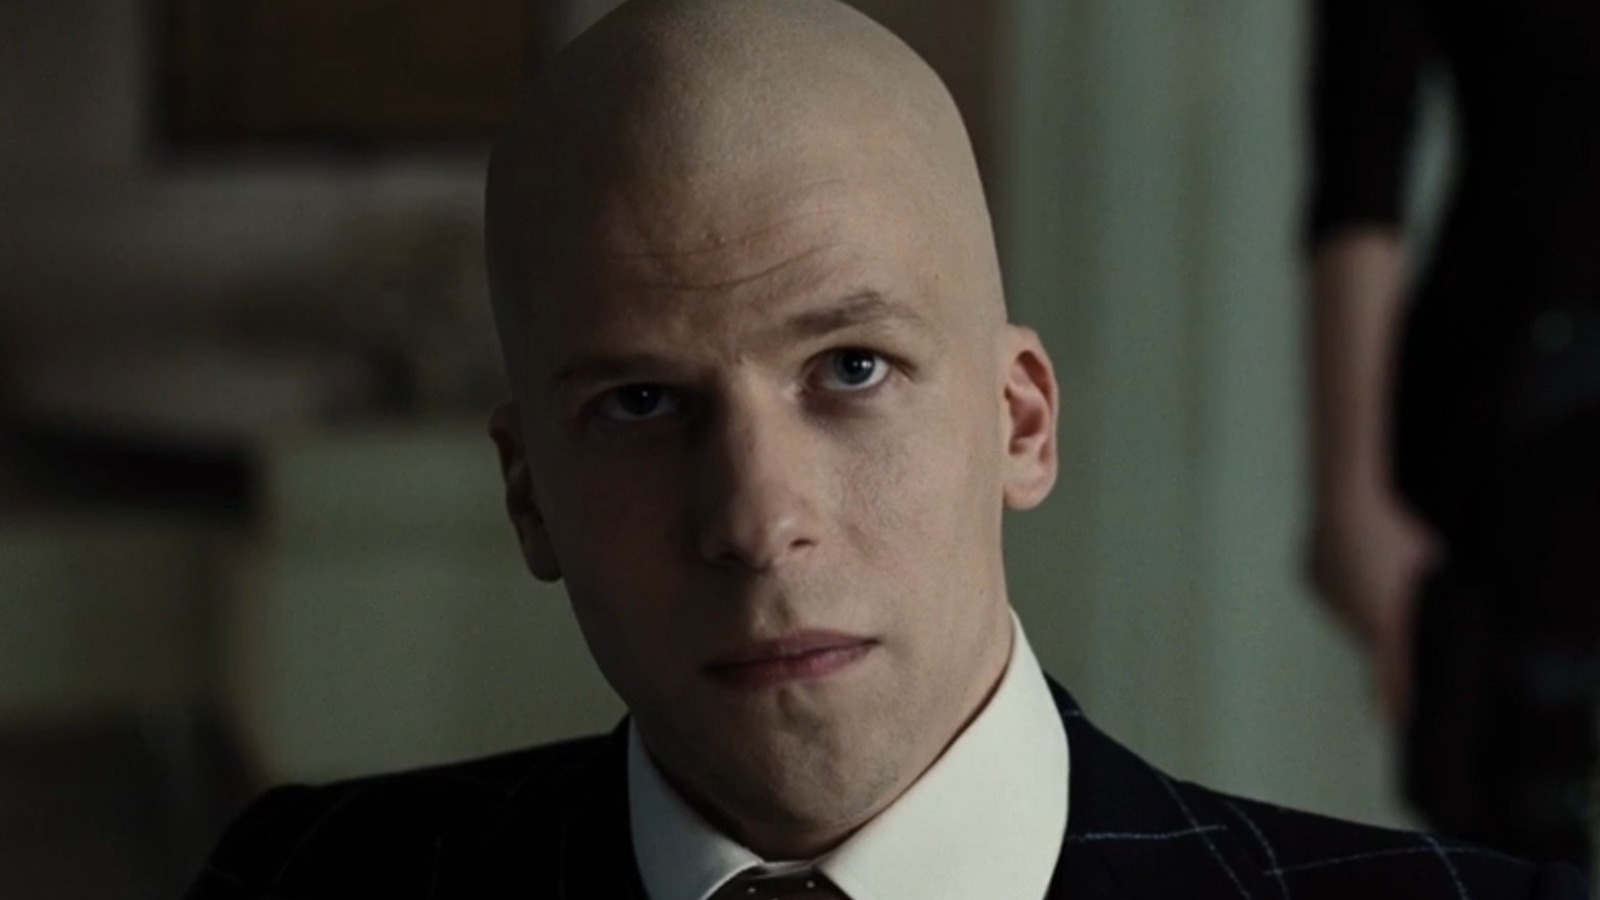 Its Time To Talk About That Lex Luthor Scene In Zack Snyders Justice League 